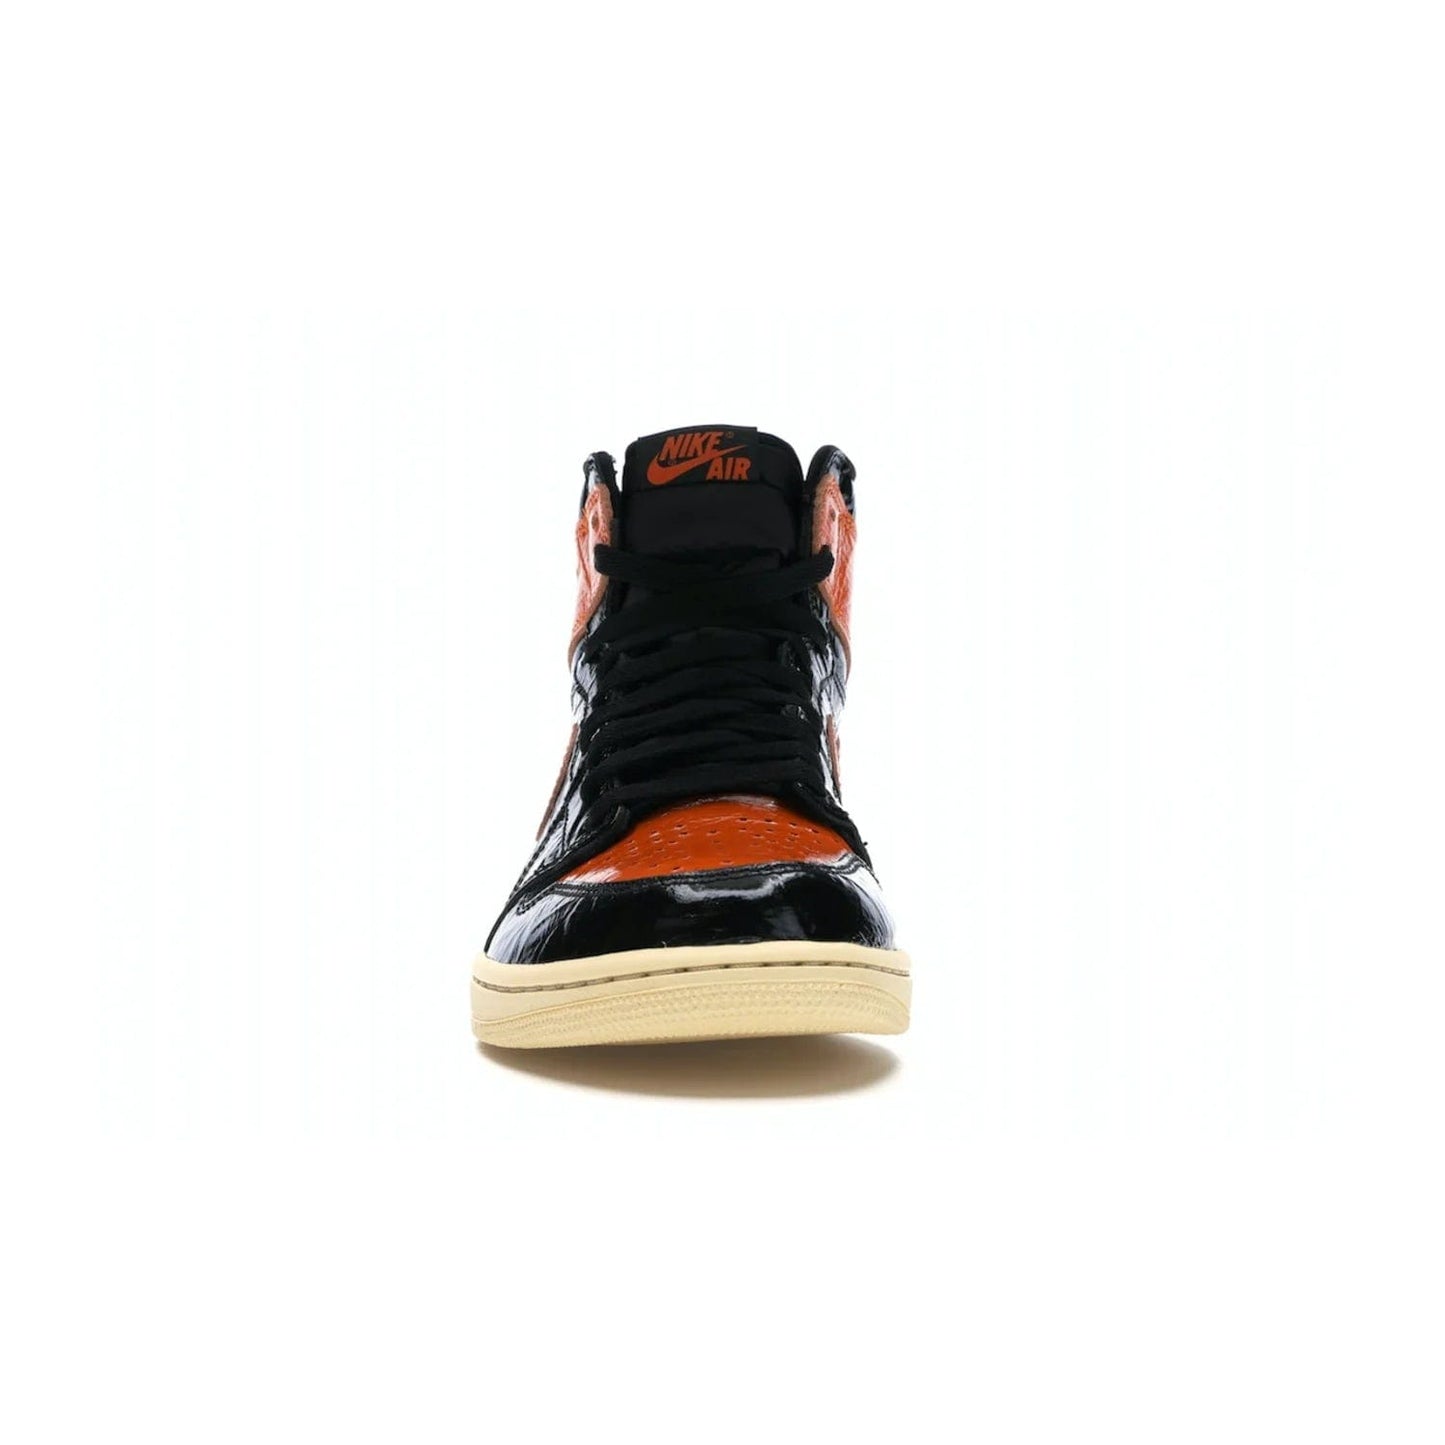 Jordan 1 Retro High Shattered Backboard 3.0 - Image 10 - Only at www.BallersClubKickz.com - #
Jordan 1 Retro High Shattered Backboard 3.0: the perfect blend of modern style and nostalgic flair featuring an orange and black crinkled patent leather upper and yellowed vanilla outsole. Get these exclusive sneakers released in October of 2019!